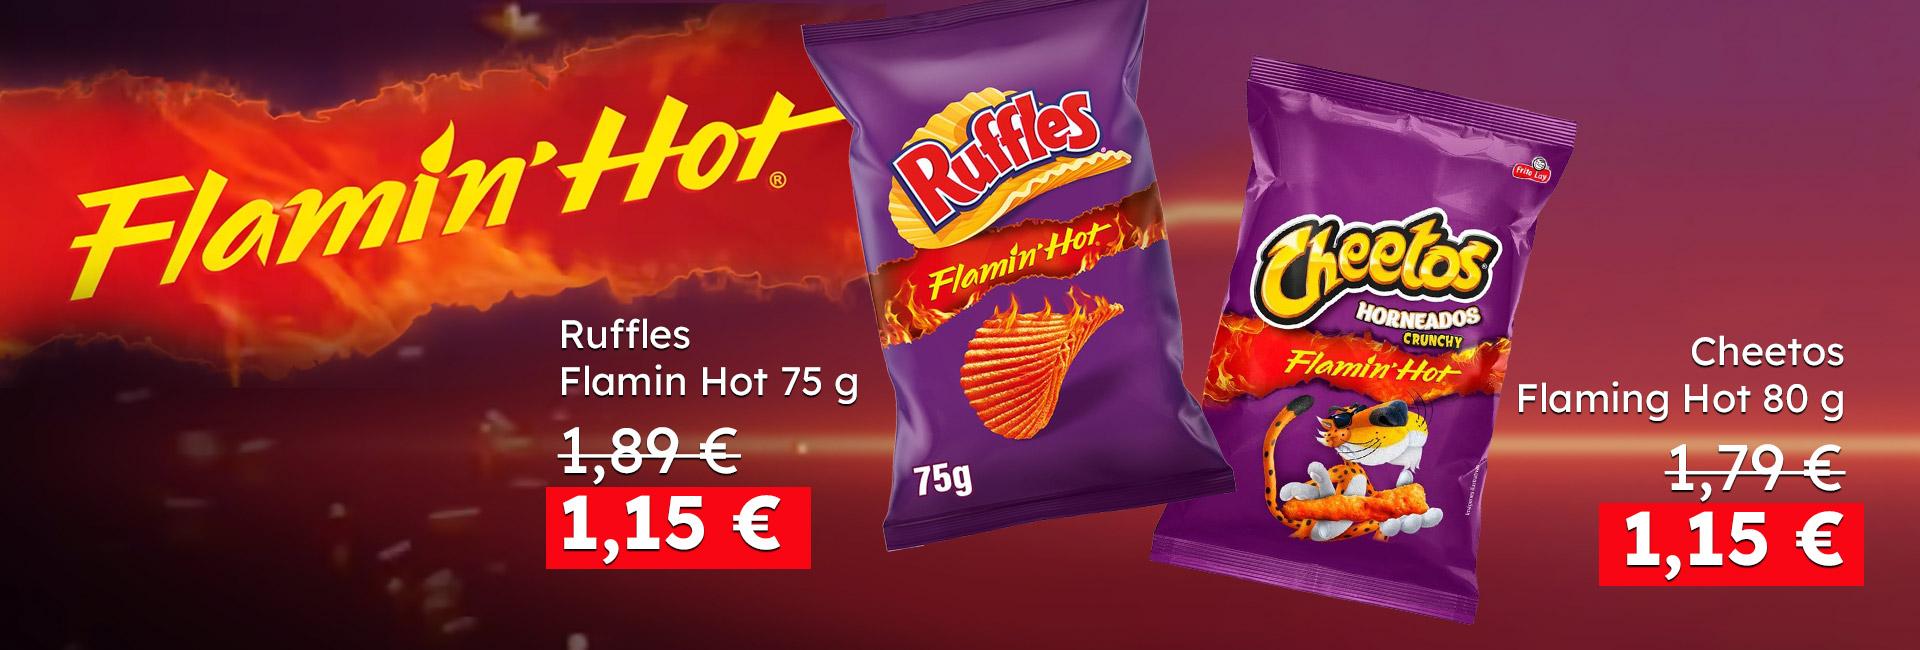 Flamin Hot Promotion